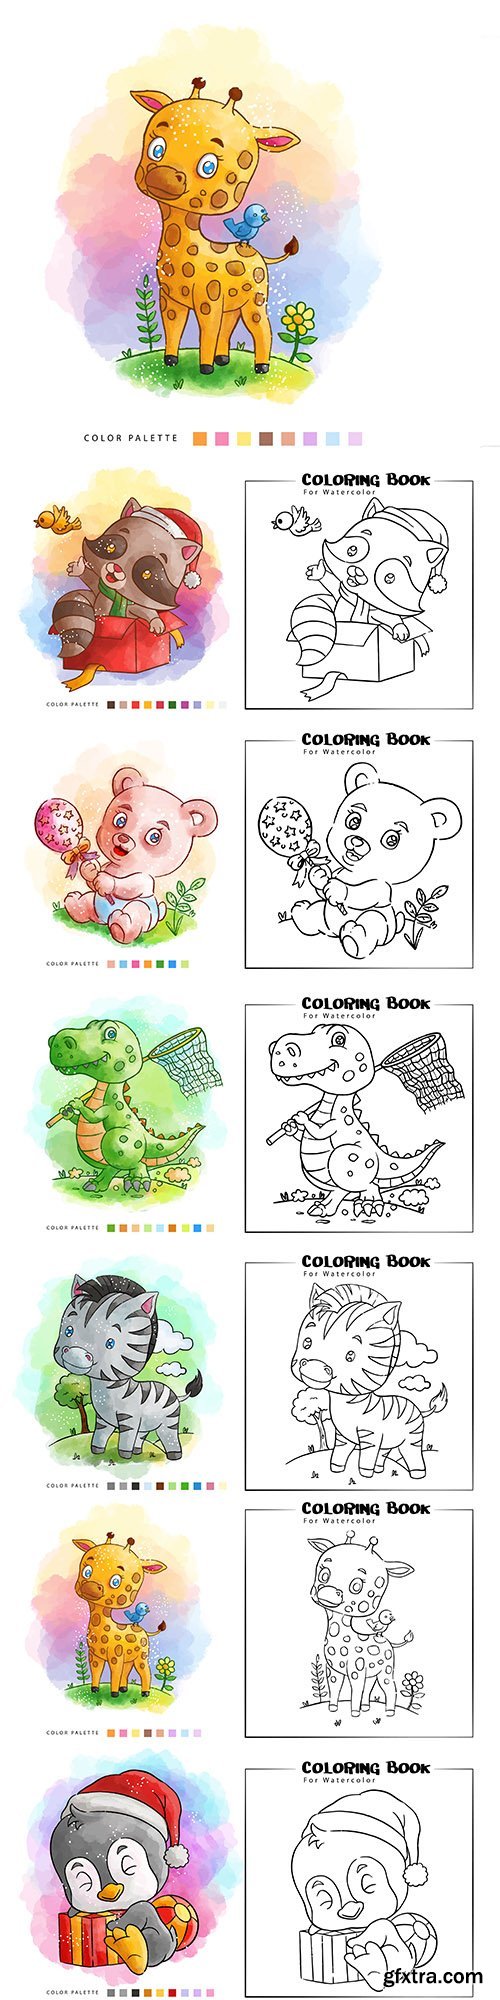 Coloring nice animal watercolor illustrations